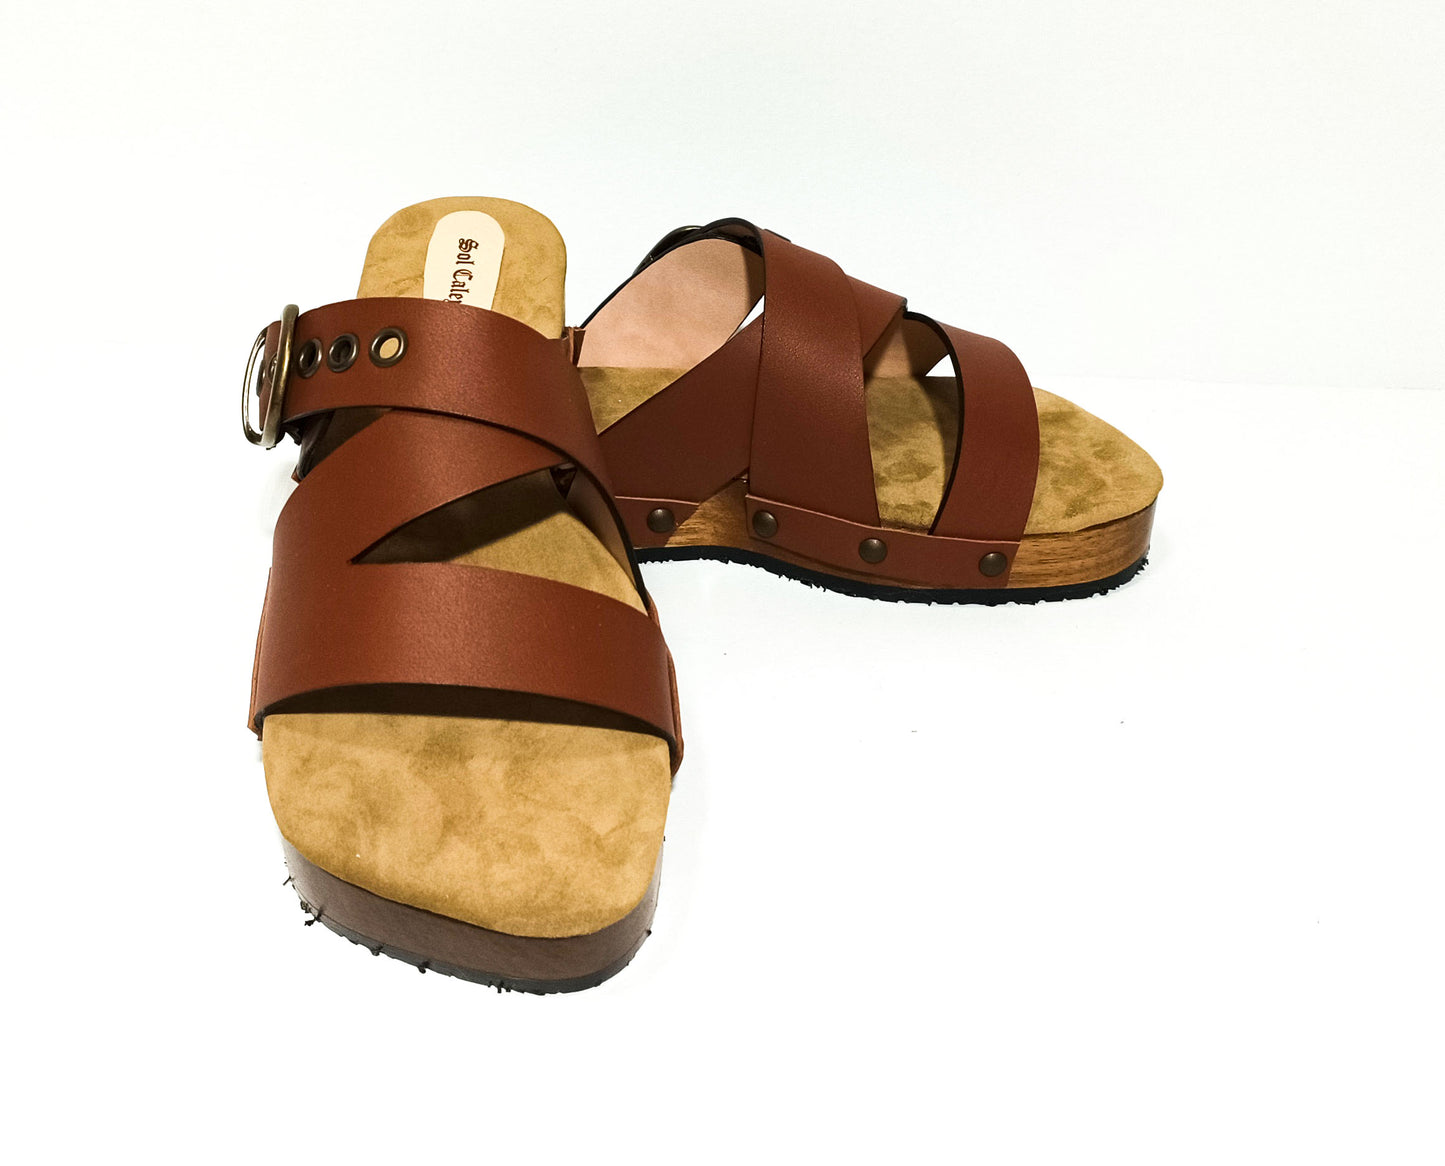 Brown clog sandal for men. Leather sandal for men. Men's sandal with wooden sole. Men's sandal with straps. High quality handmade leather shoes by sol Caleyo. Sustainable fashion.